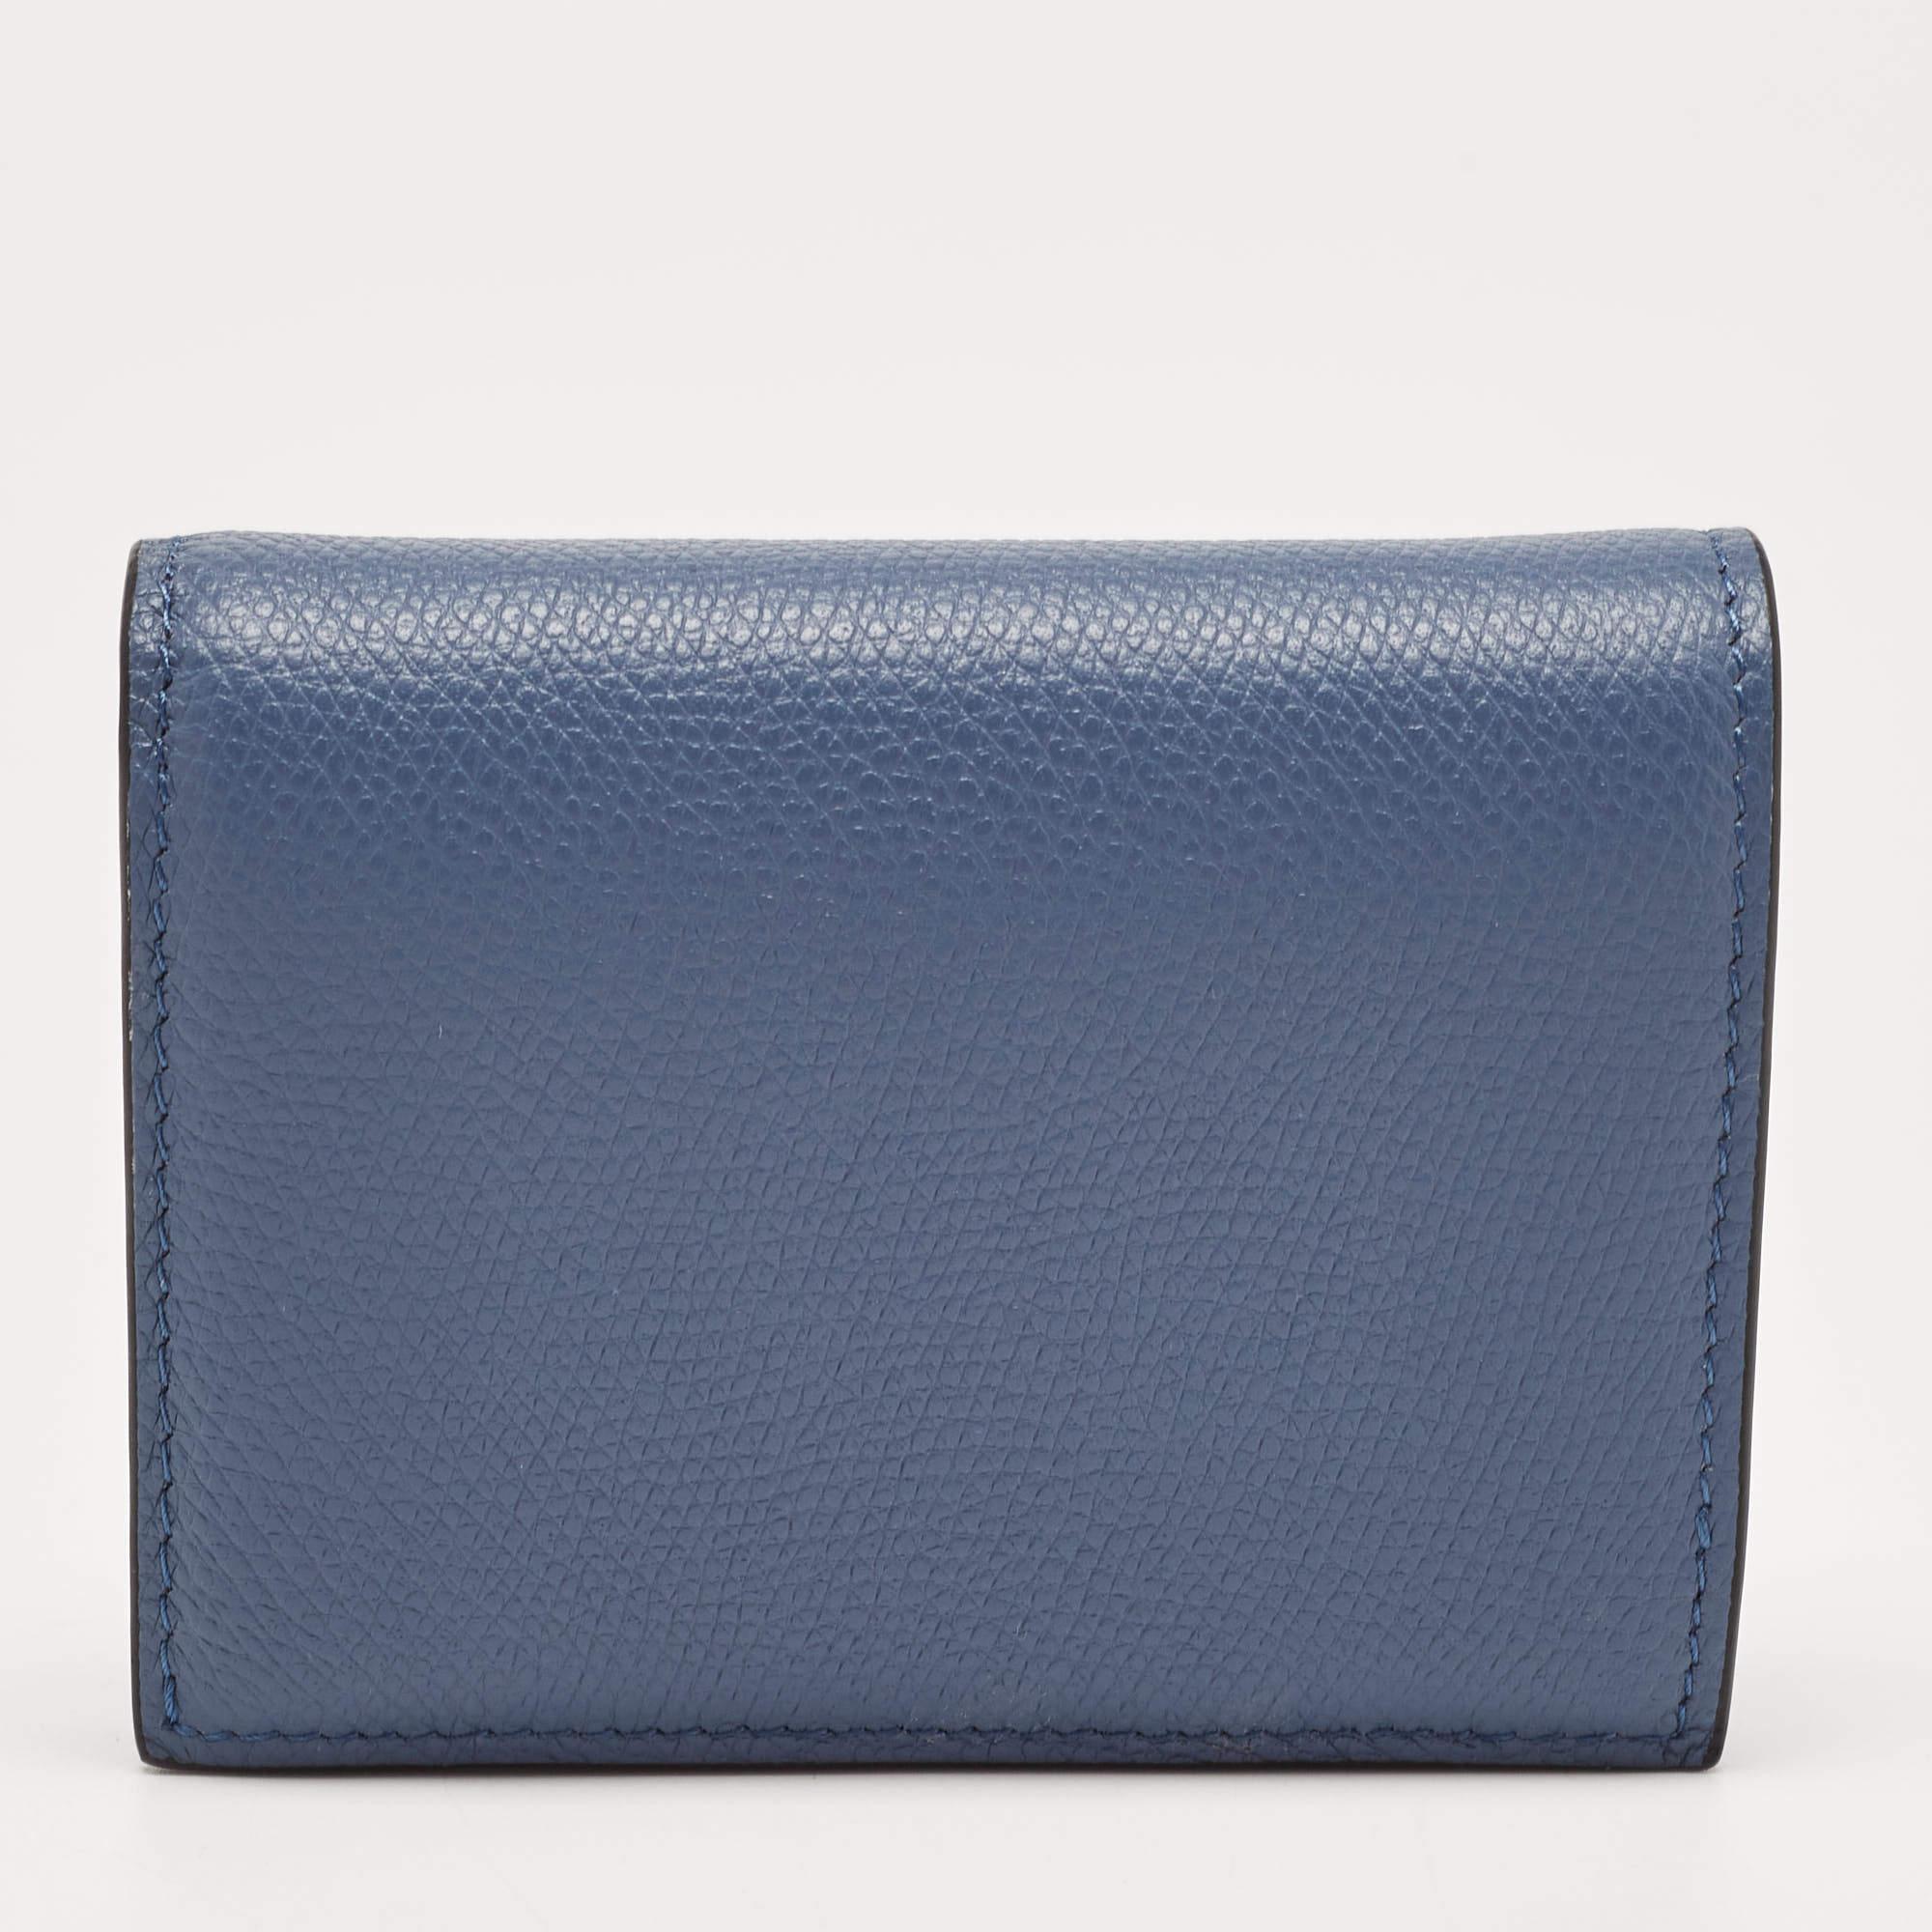 Women's Valentino Blue Leather VLogo Compact Wallet